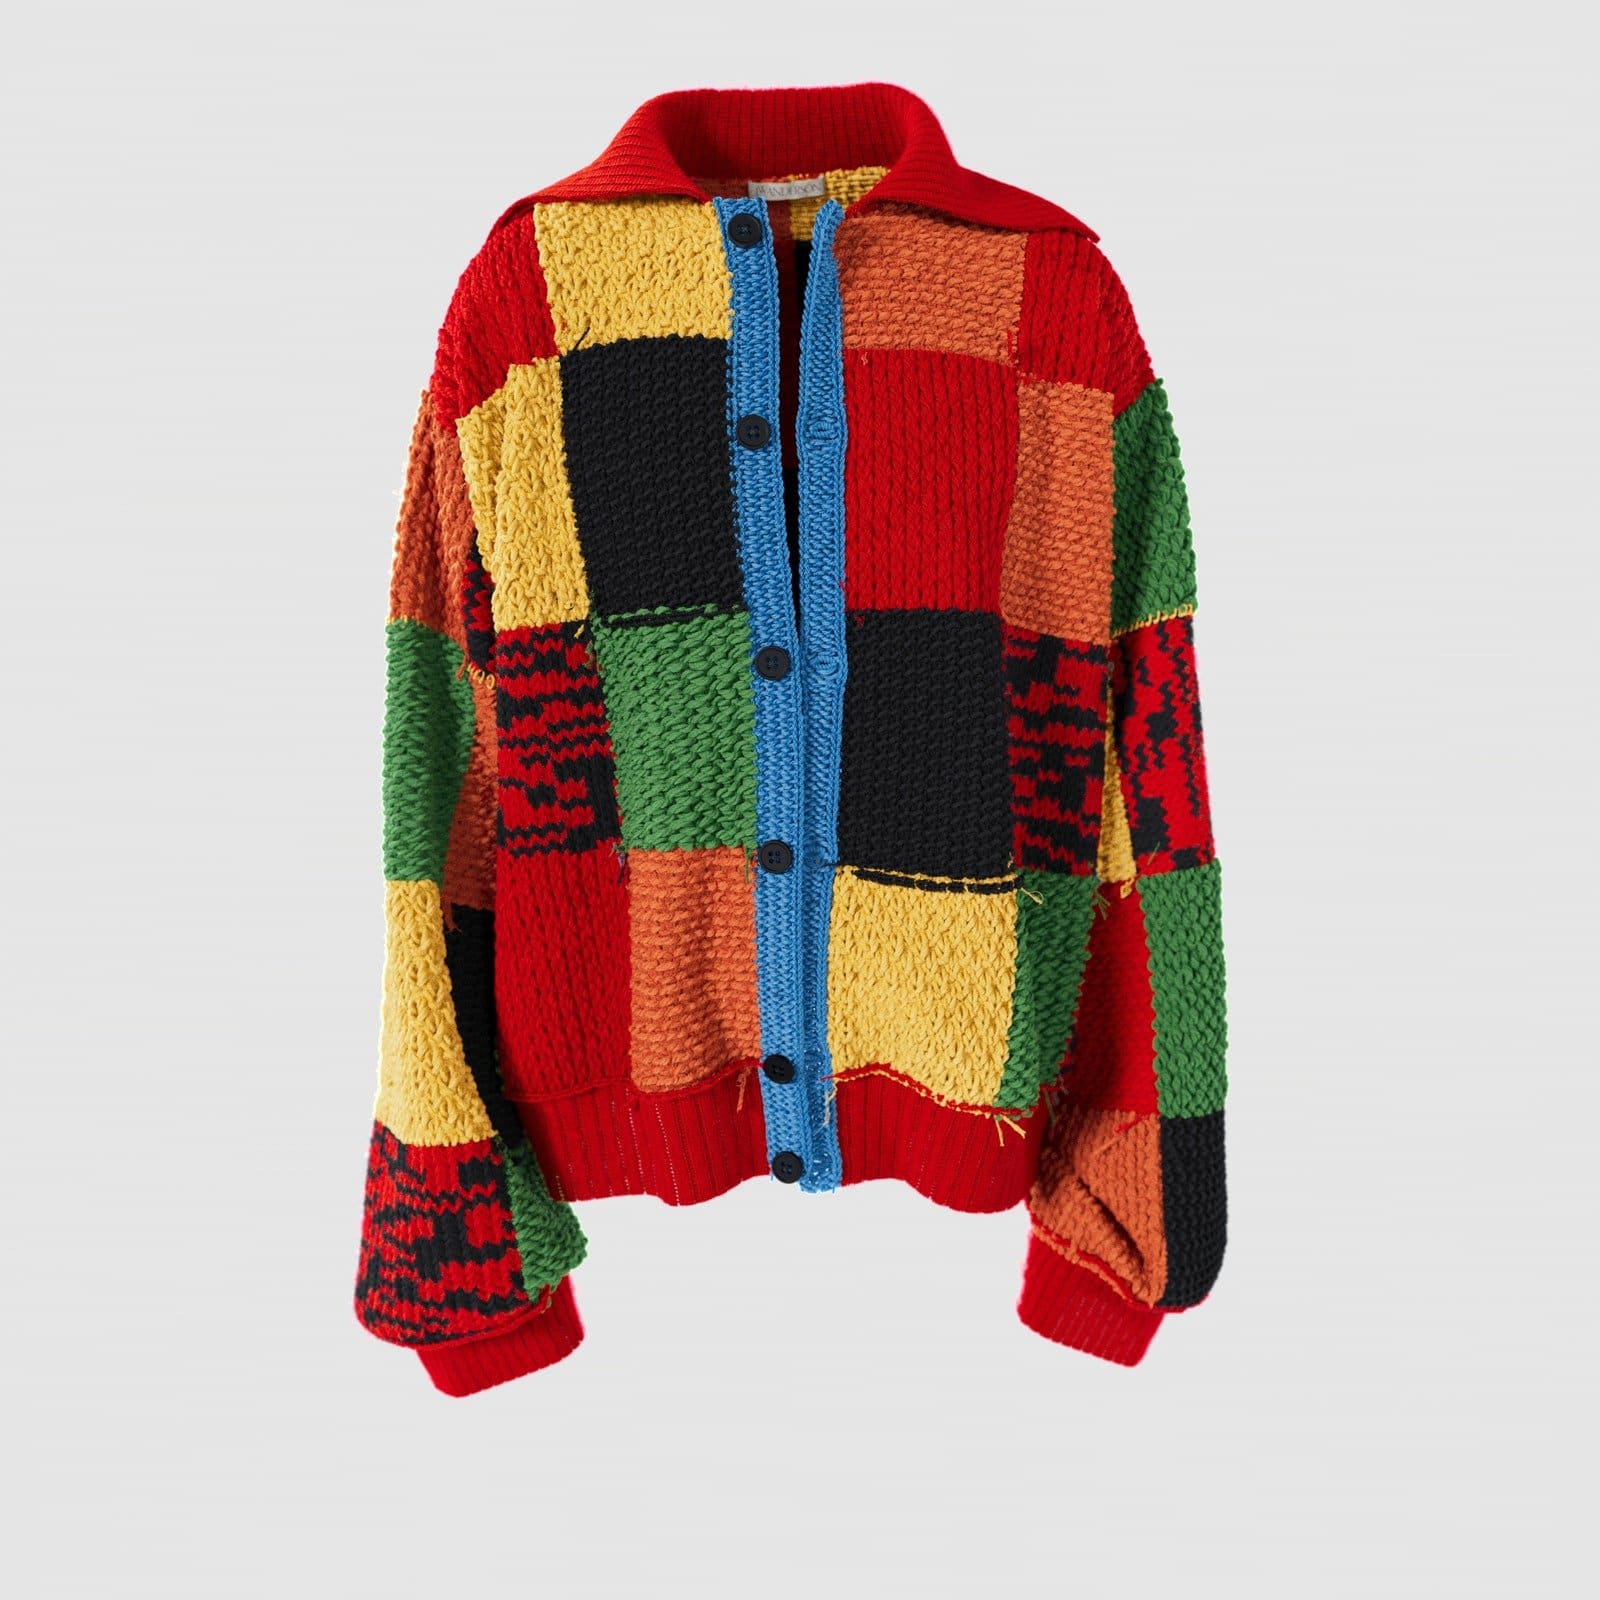 Harry Styles' Cardigan that went viral is now on sale as an NFT